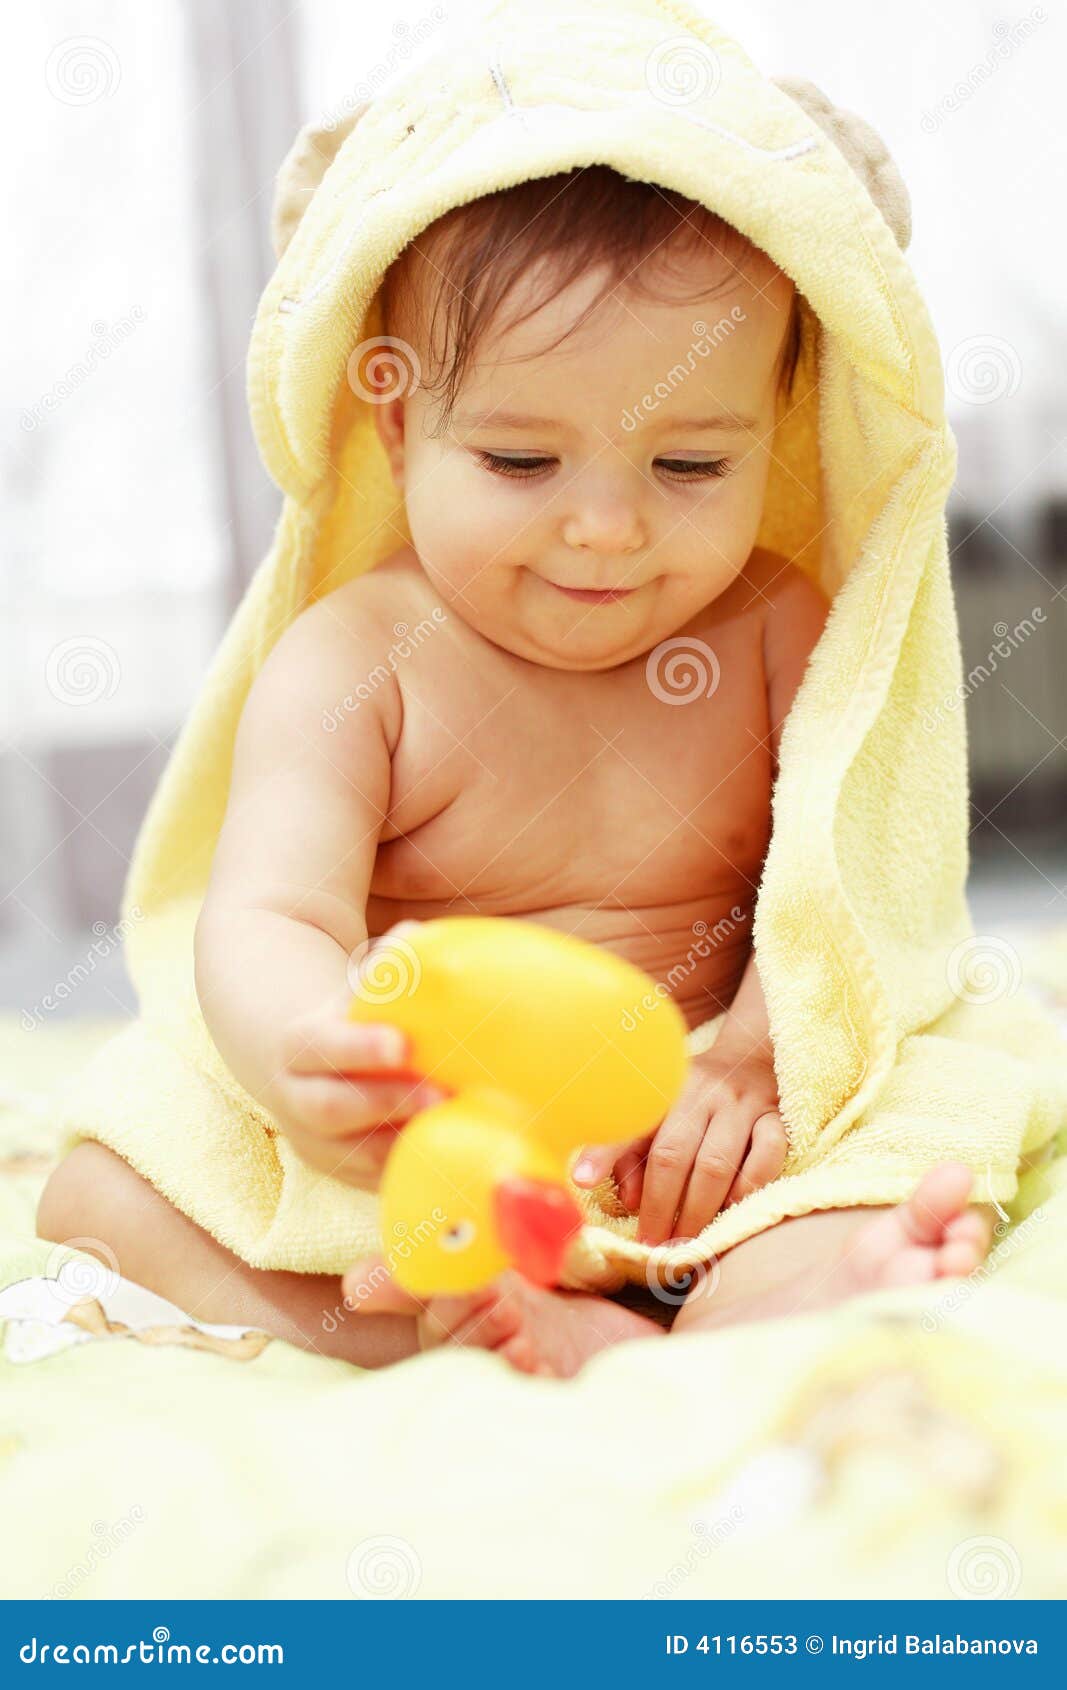 Cute baby after bath stock image. Image of children, baby - 4116553